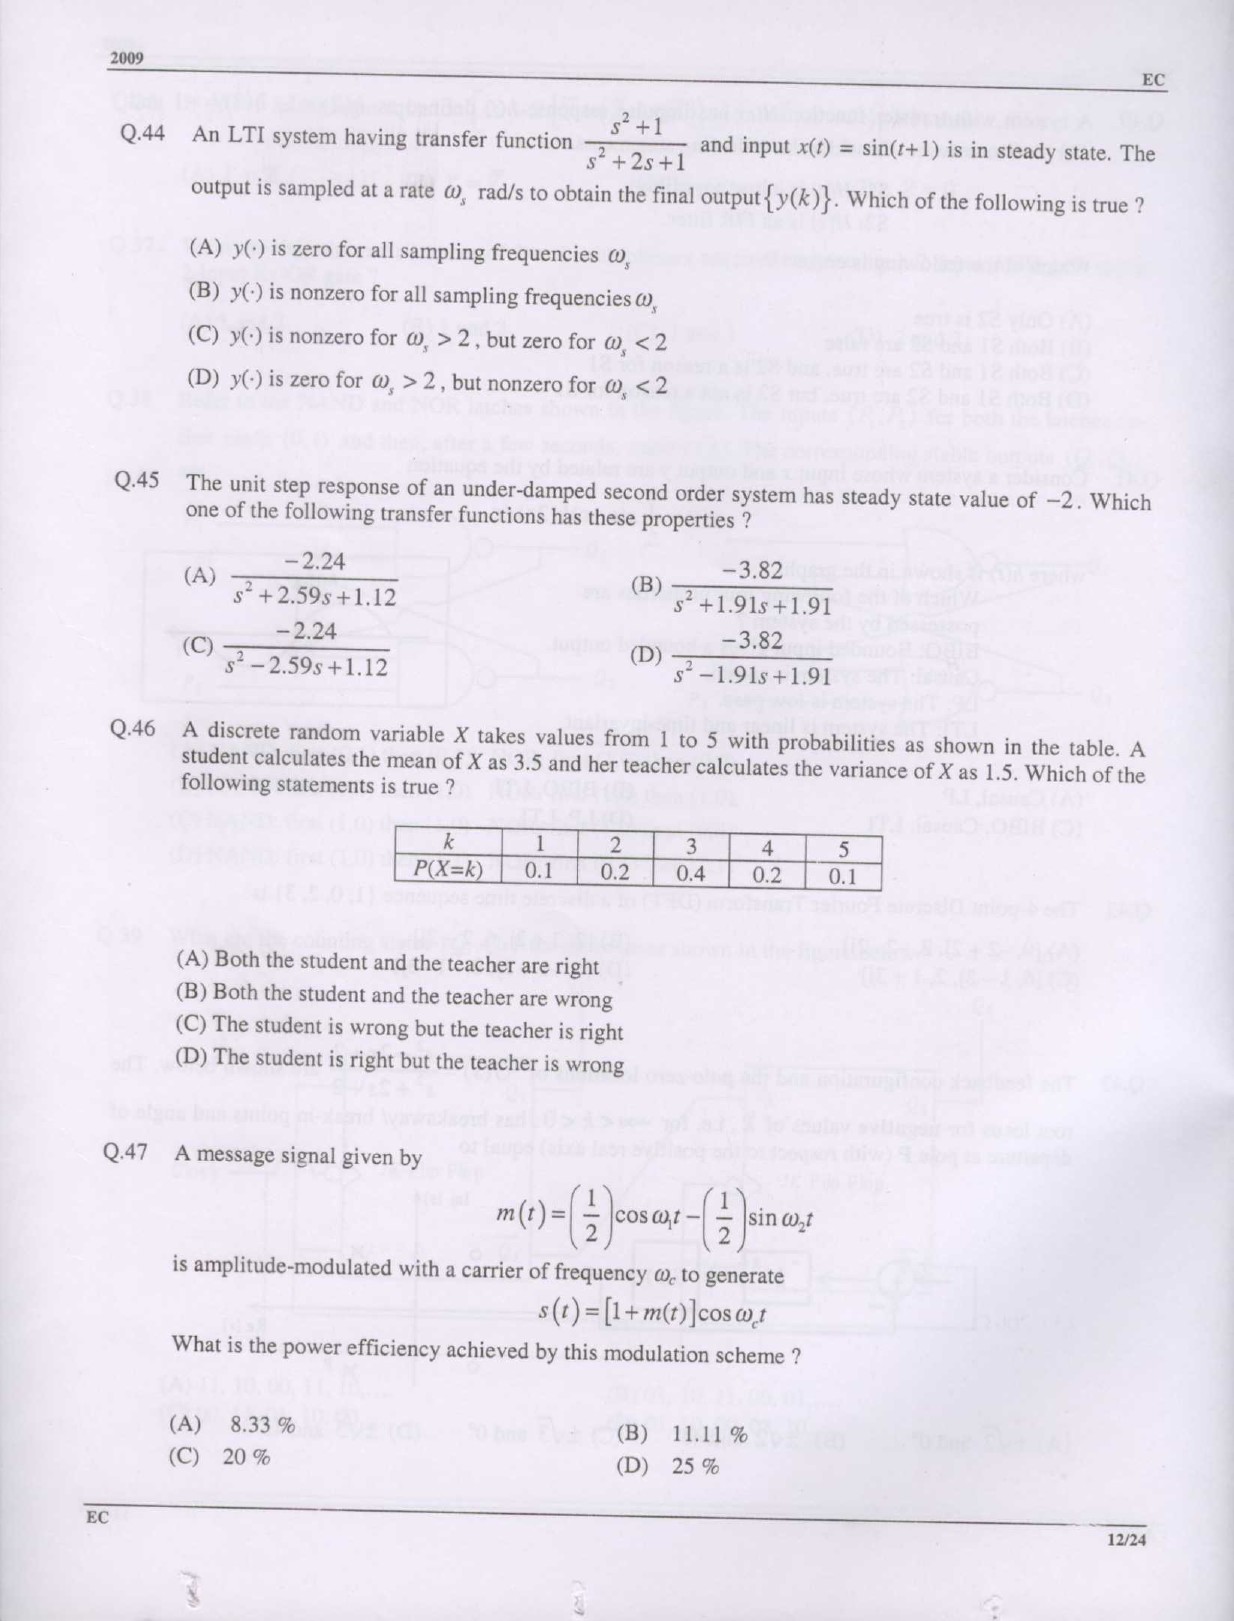 GATE Exam Question Paper 2009 Electronics and Communication Engineering 12